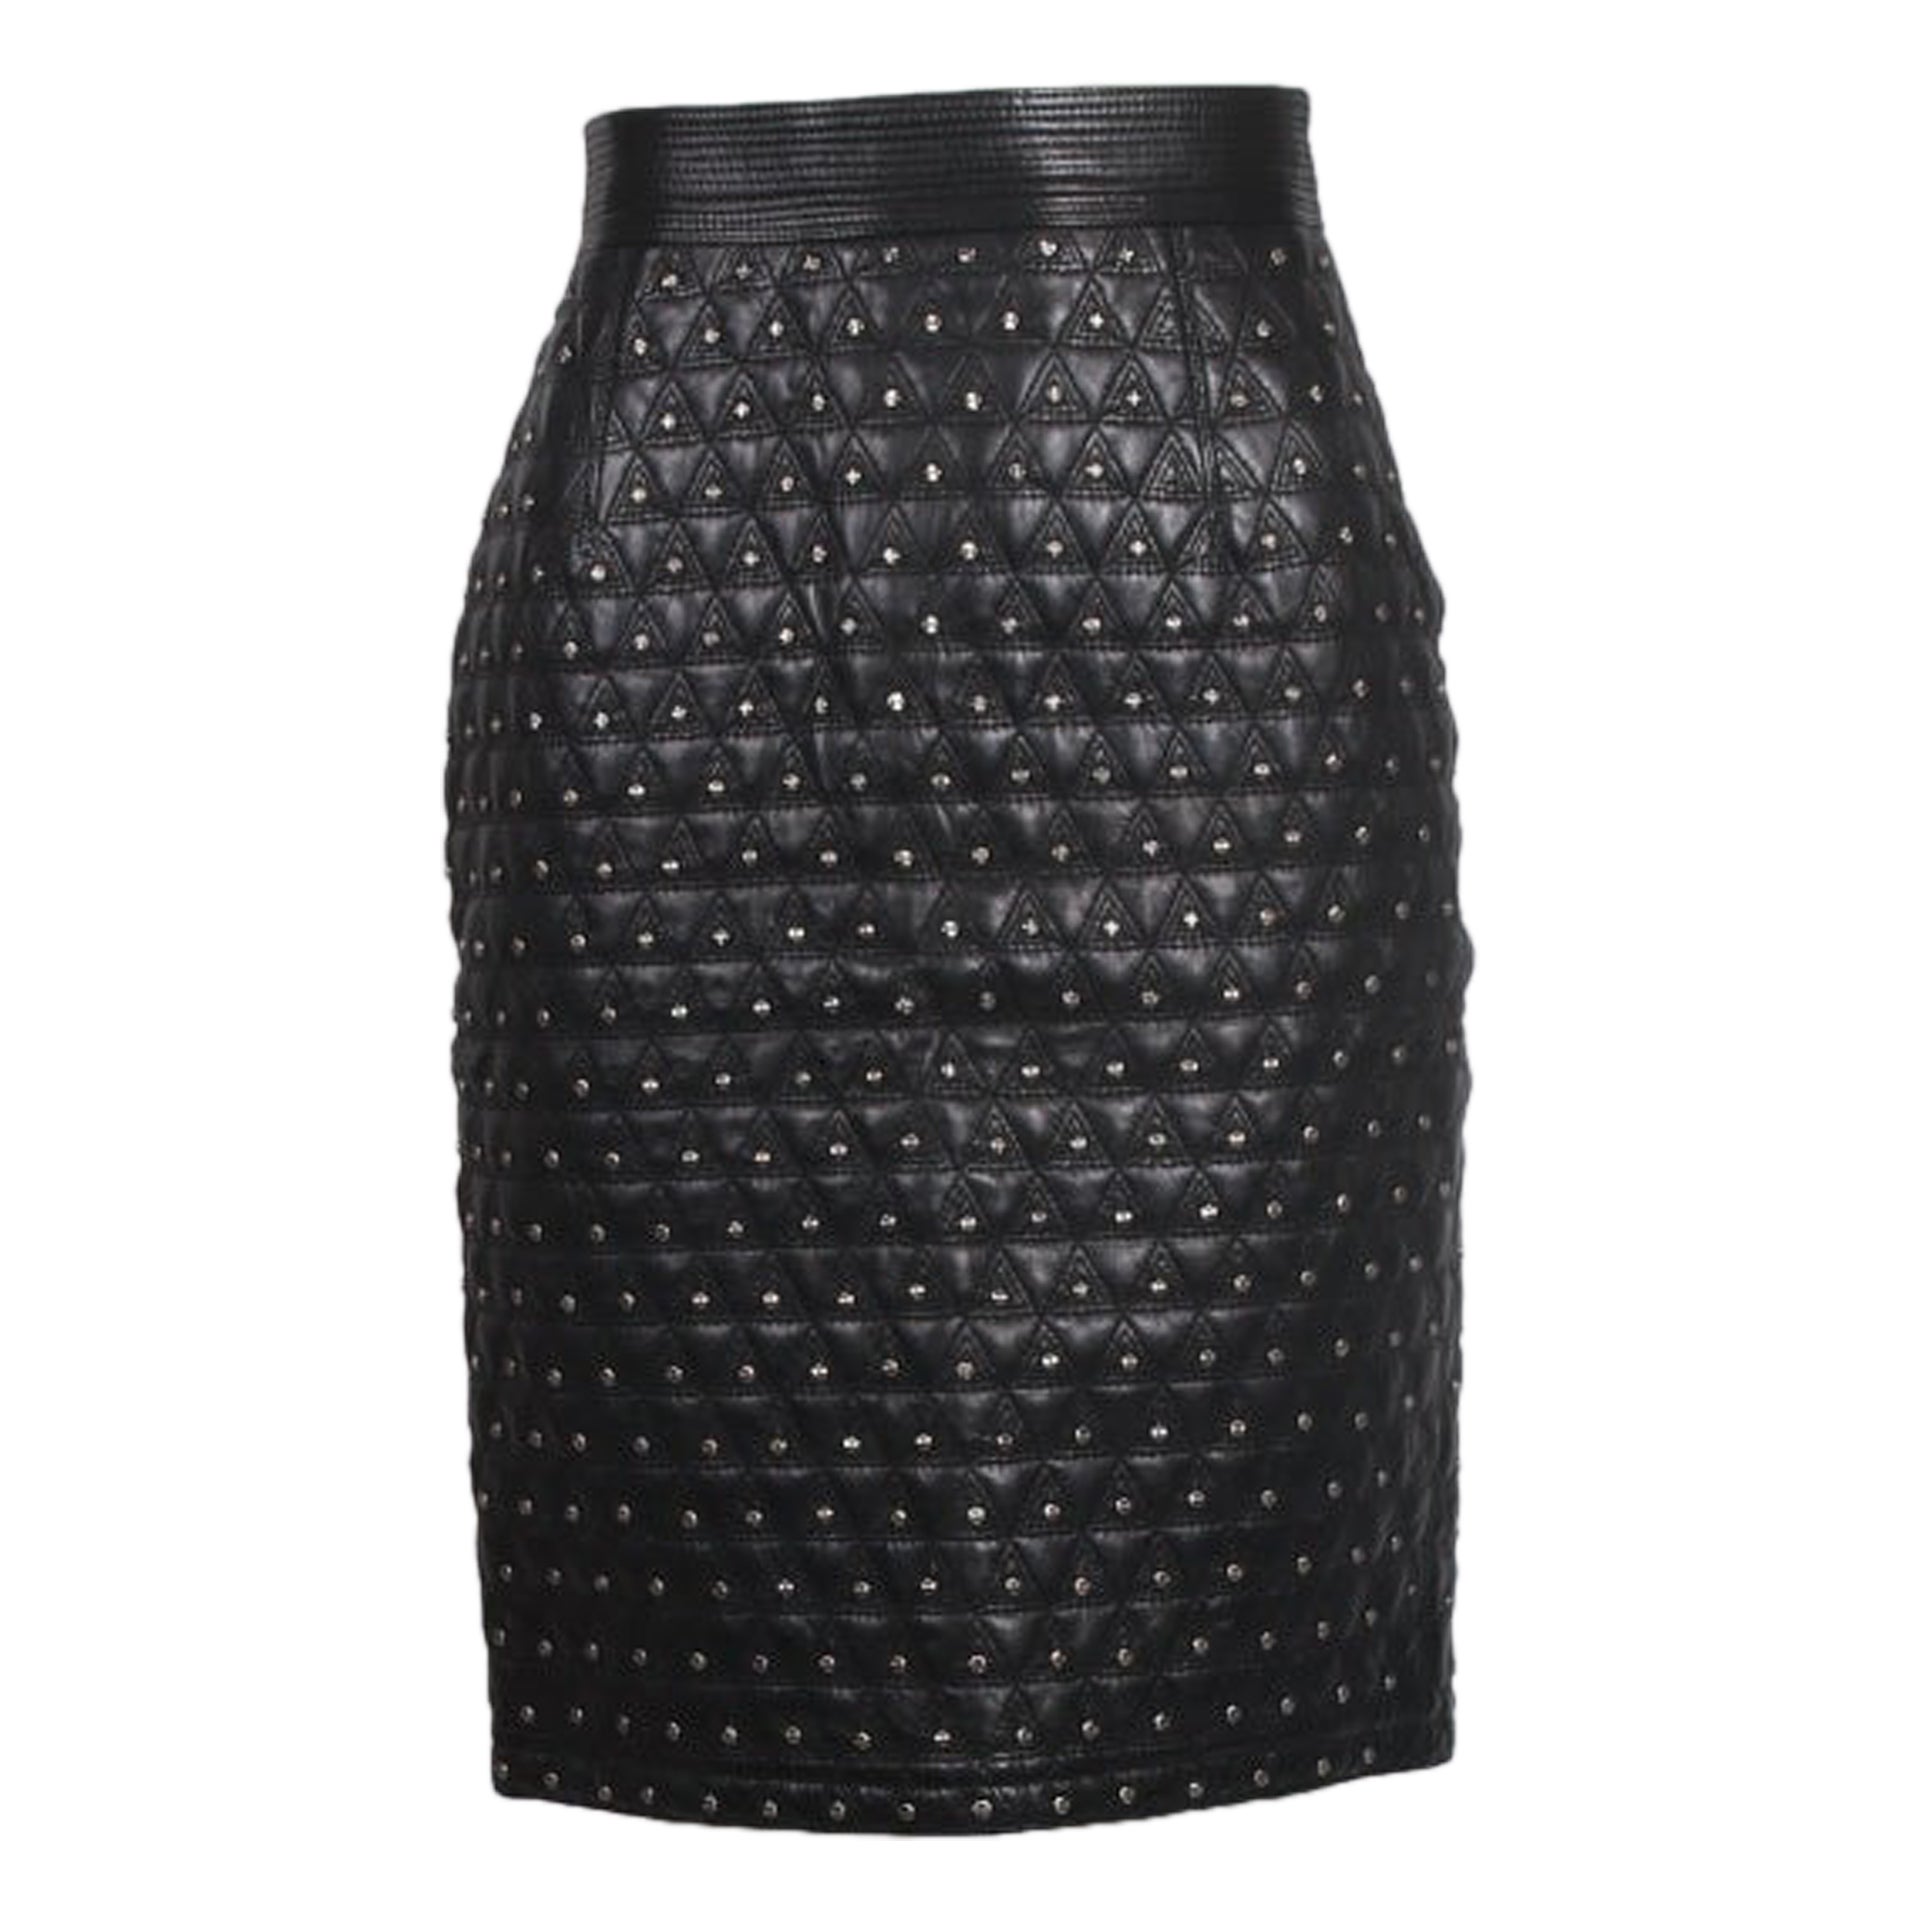 1989 F/W Gianni Versace Black Leather Quilted Skirt w/Silvertone Stud Motif For Sale